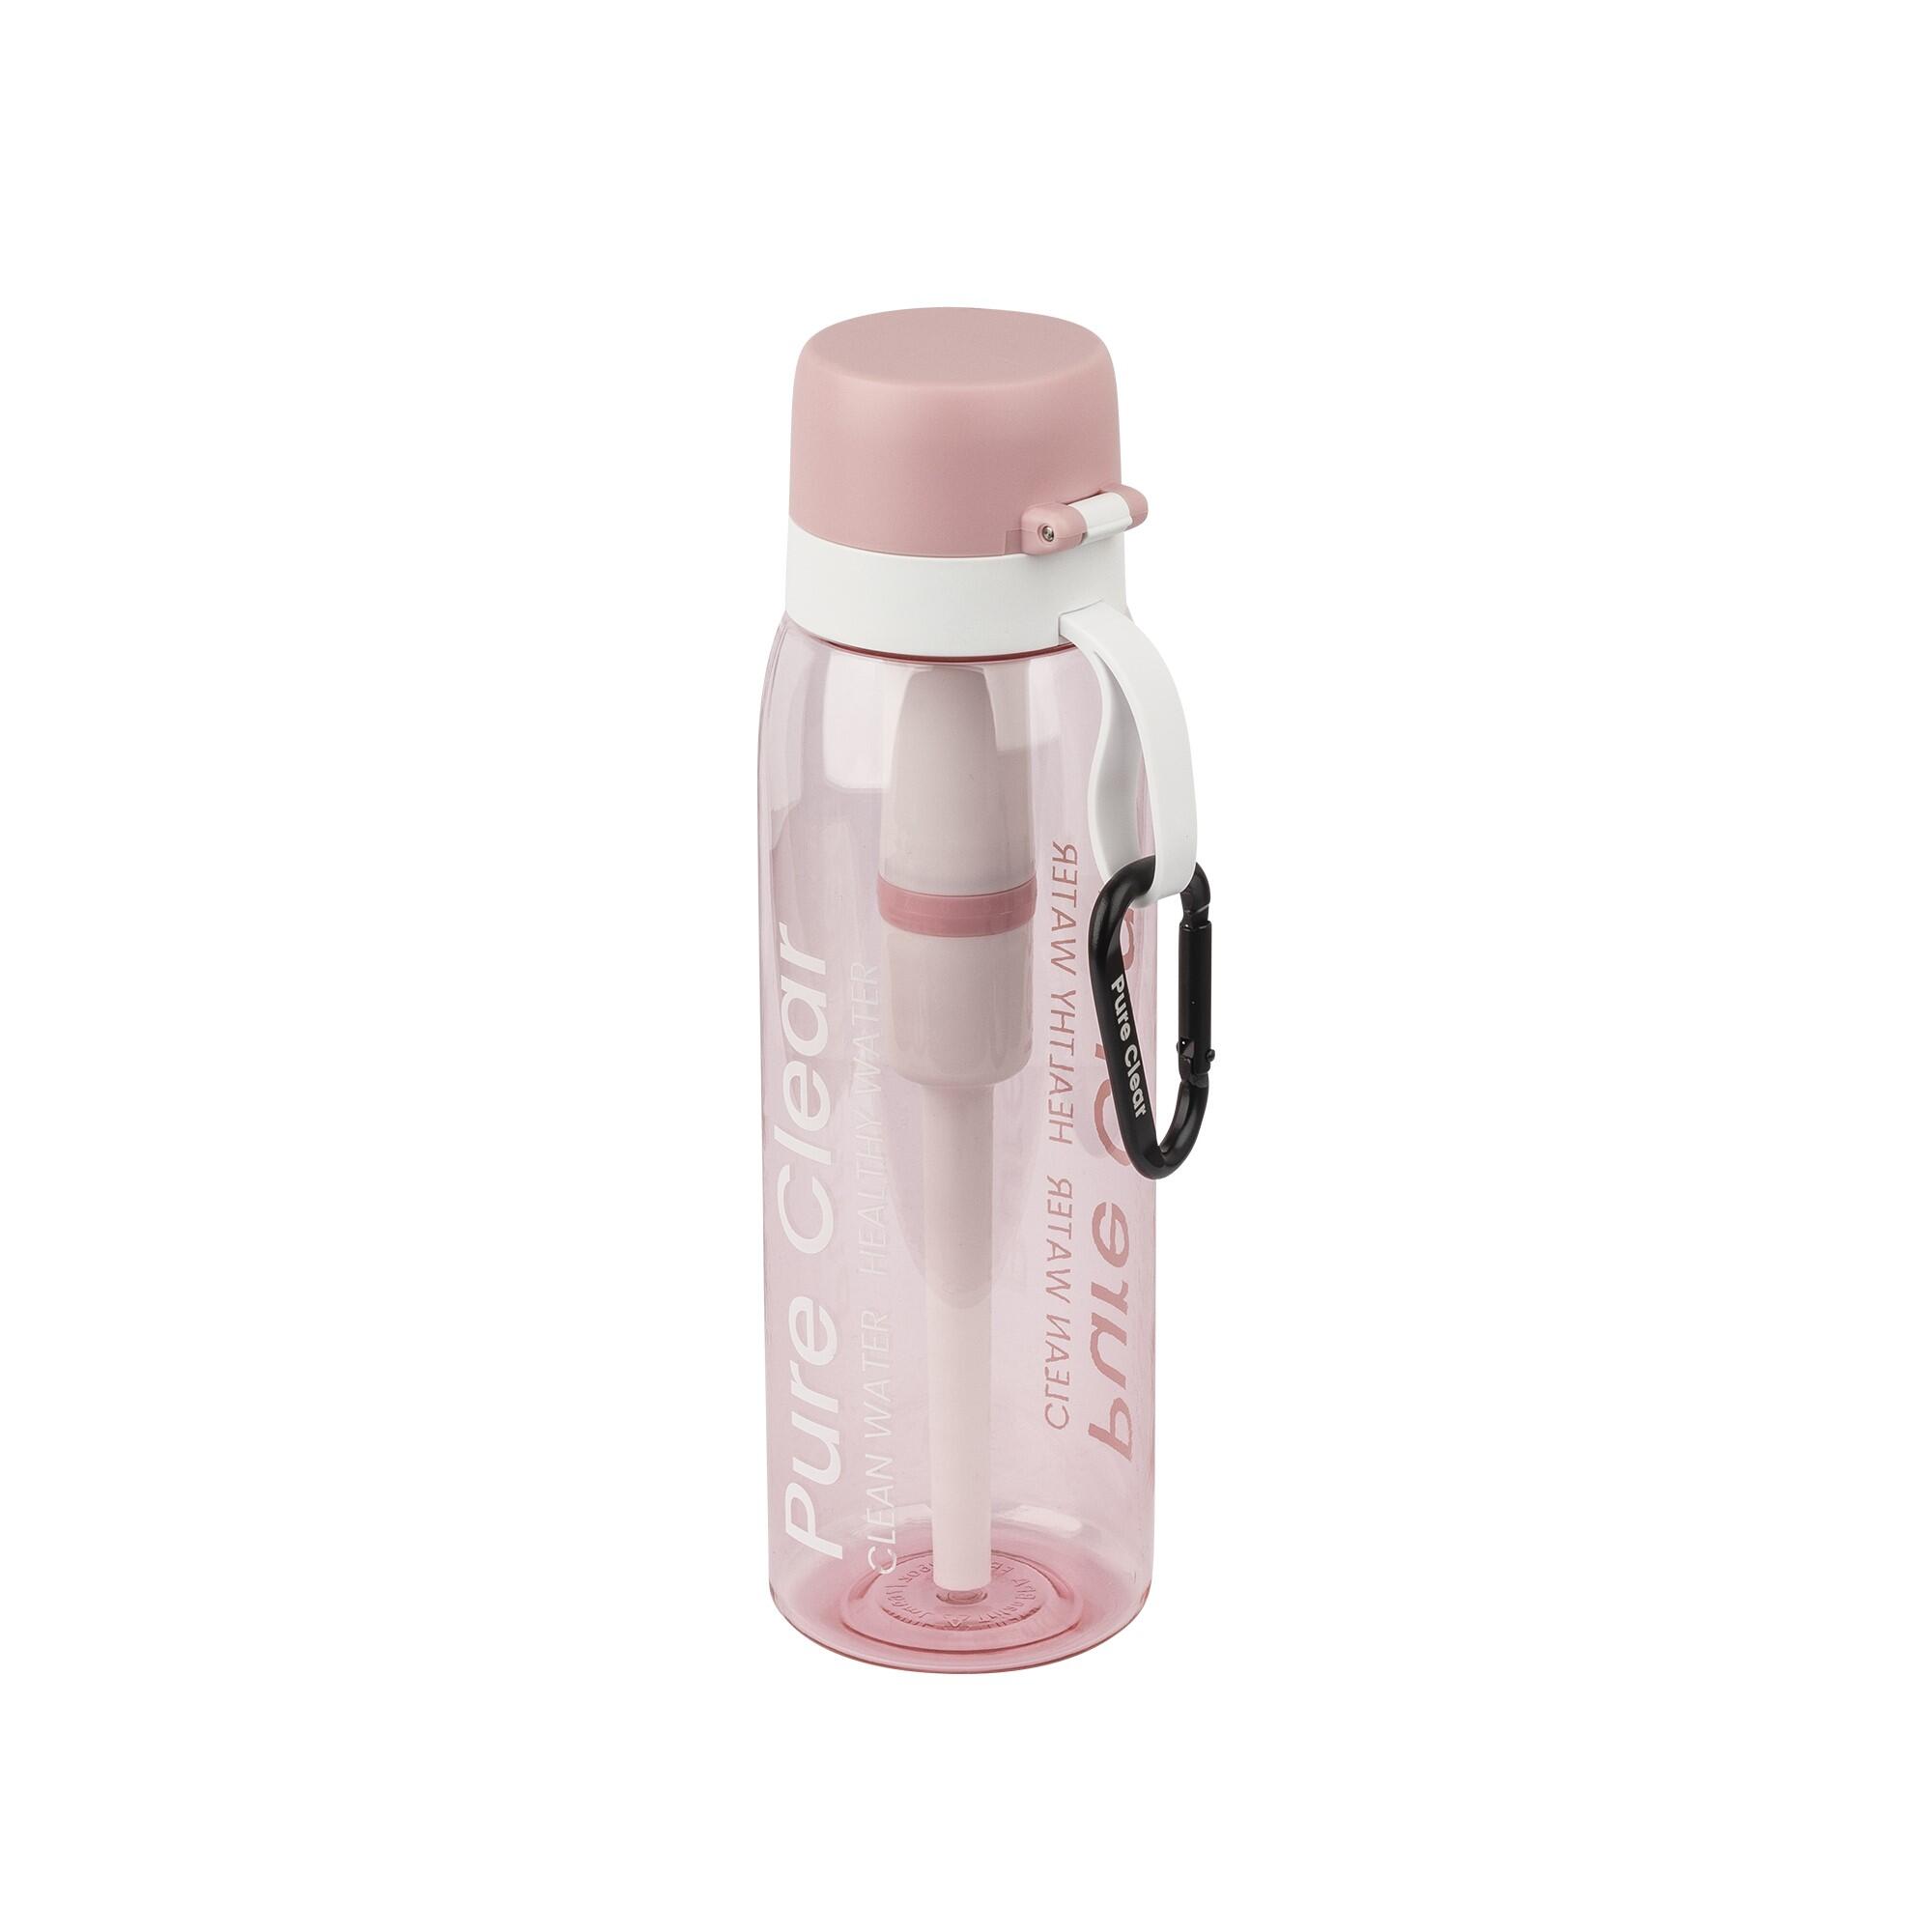 Active Water Filter Bottle - The most advanced water purifier available 1/7